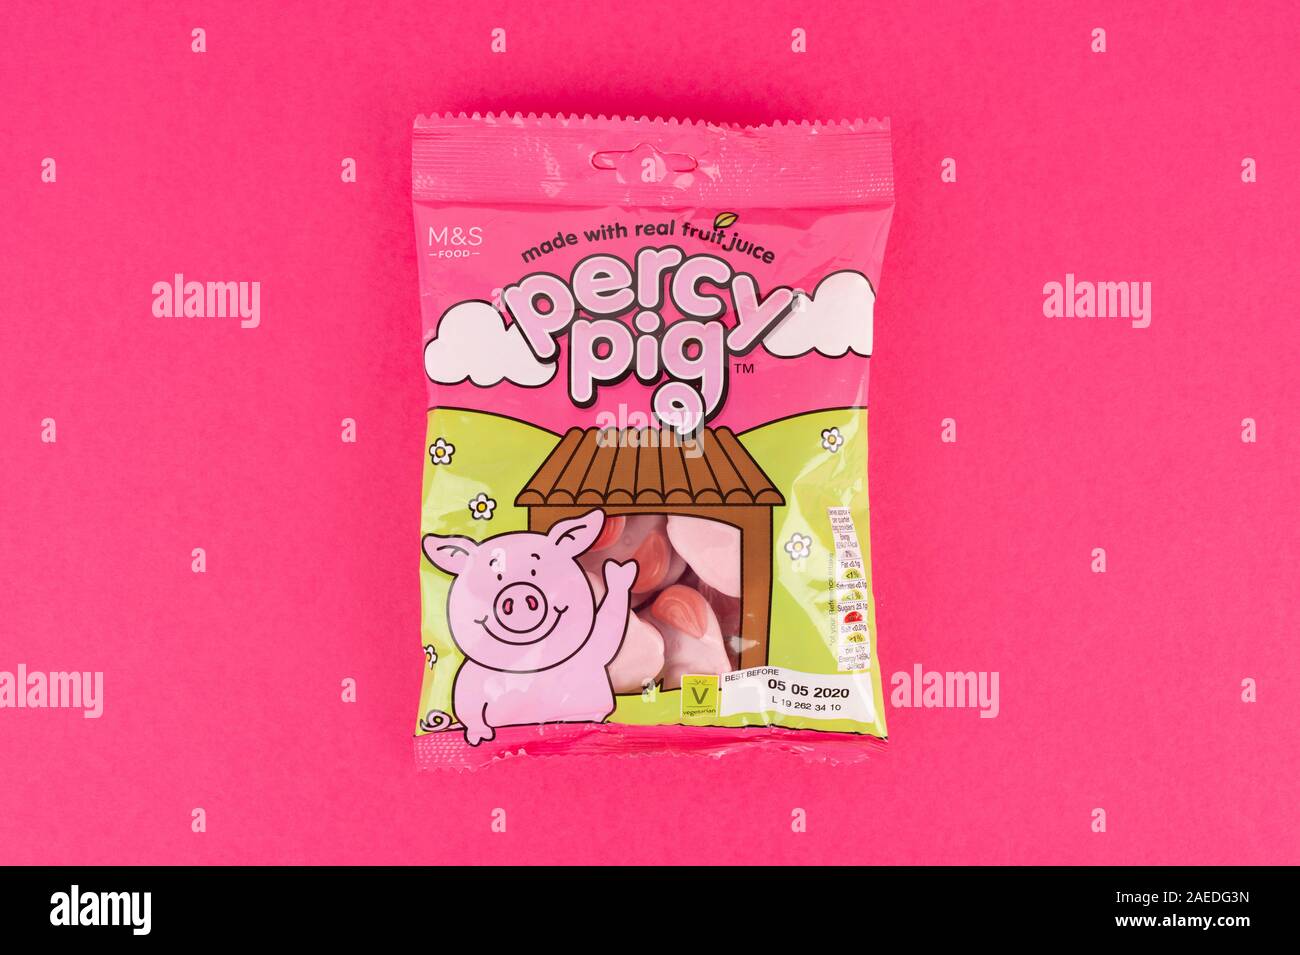 A packet of M&S Percy Pig sweets shot on a pink background. Stock Photo